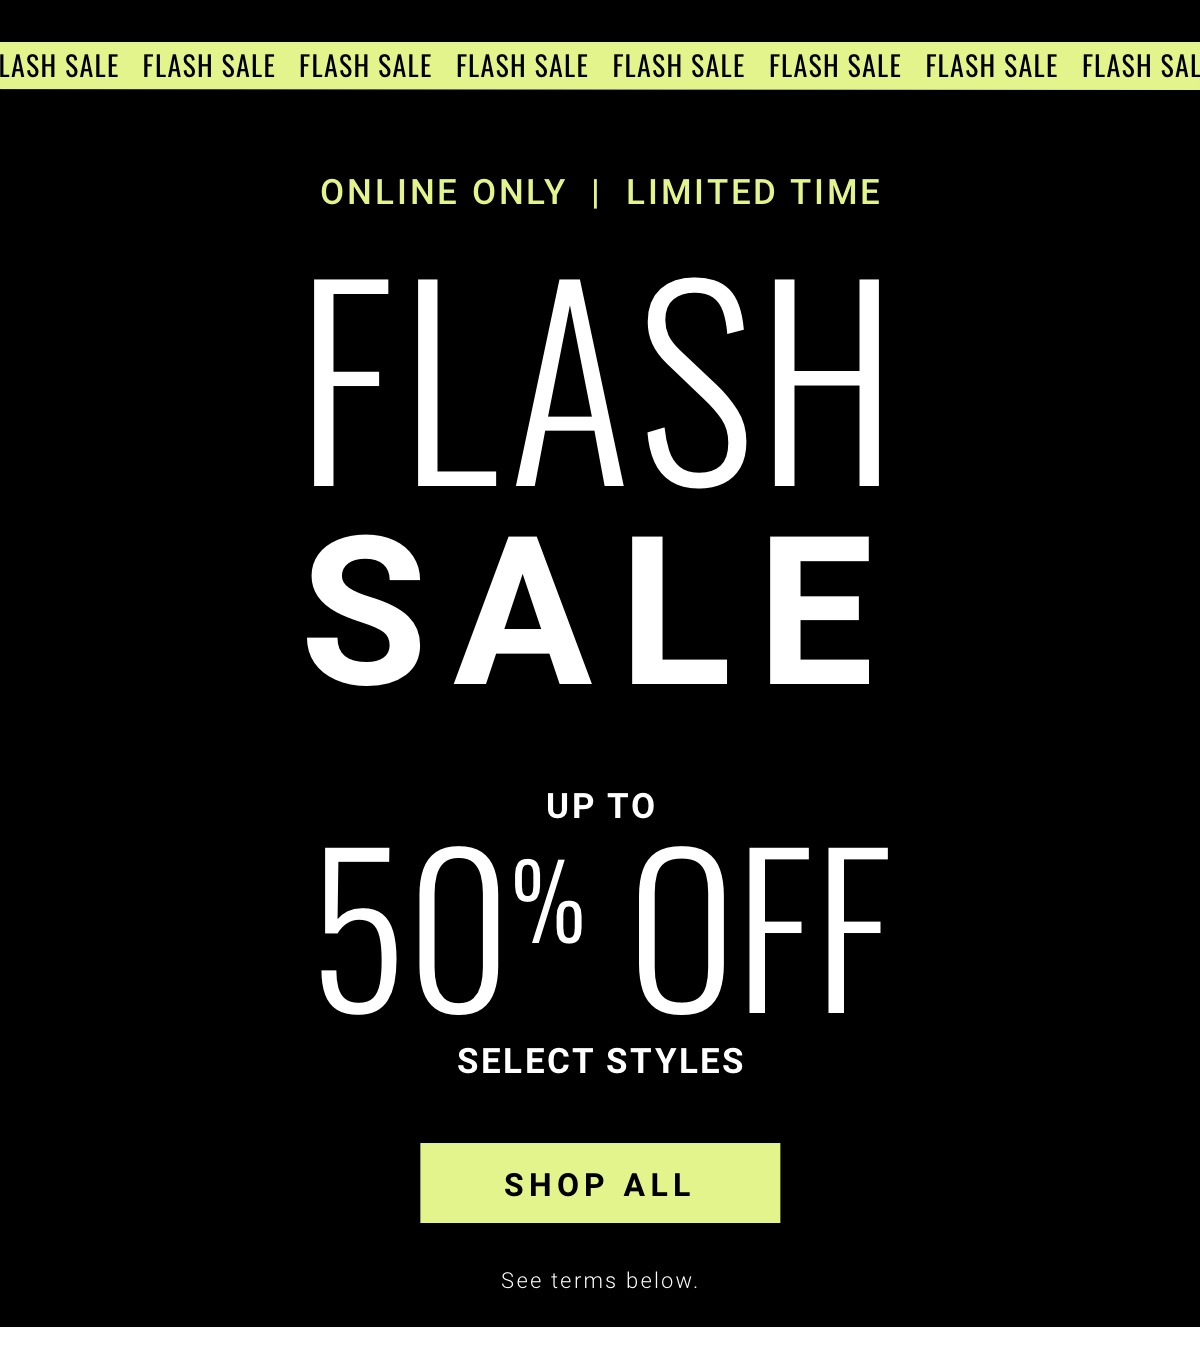 Ends Today at 11:59 PM CST|Online Only | Limited Time|Flash Sale up to 50% Off Select Styles